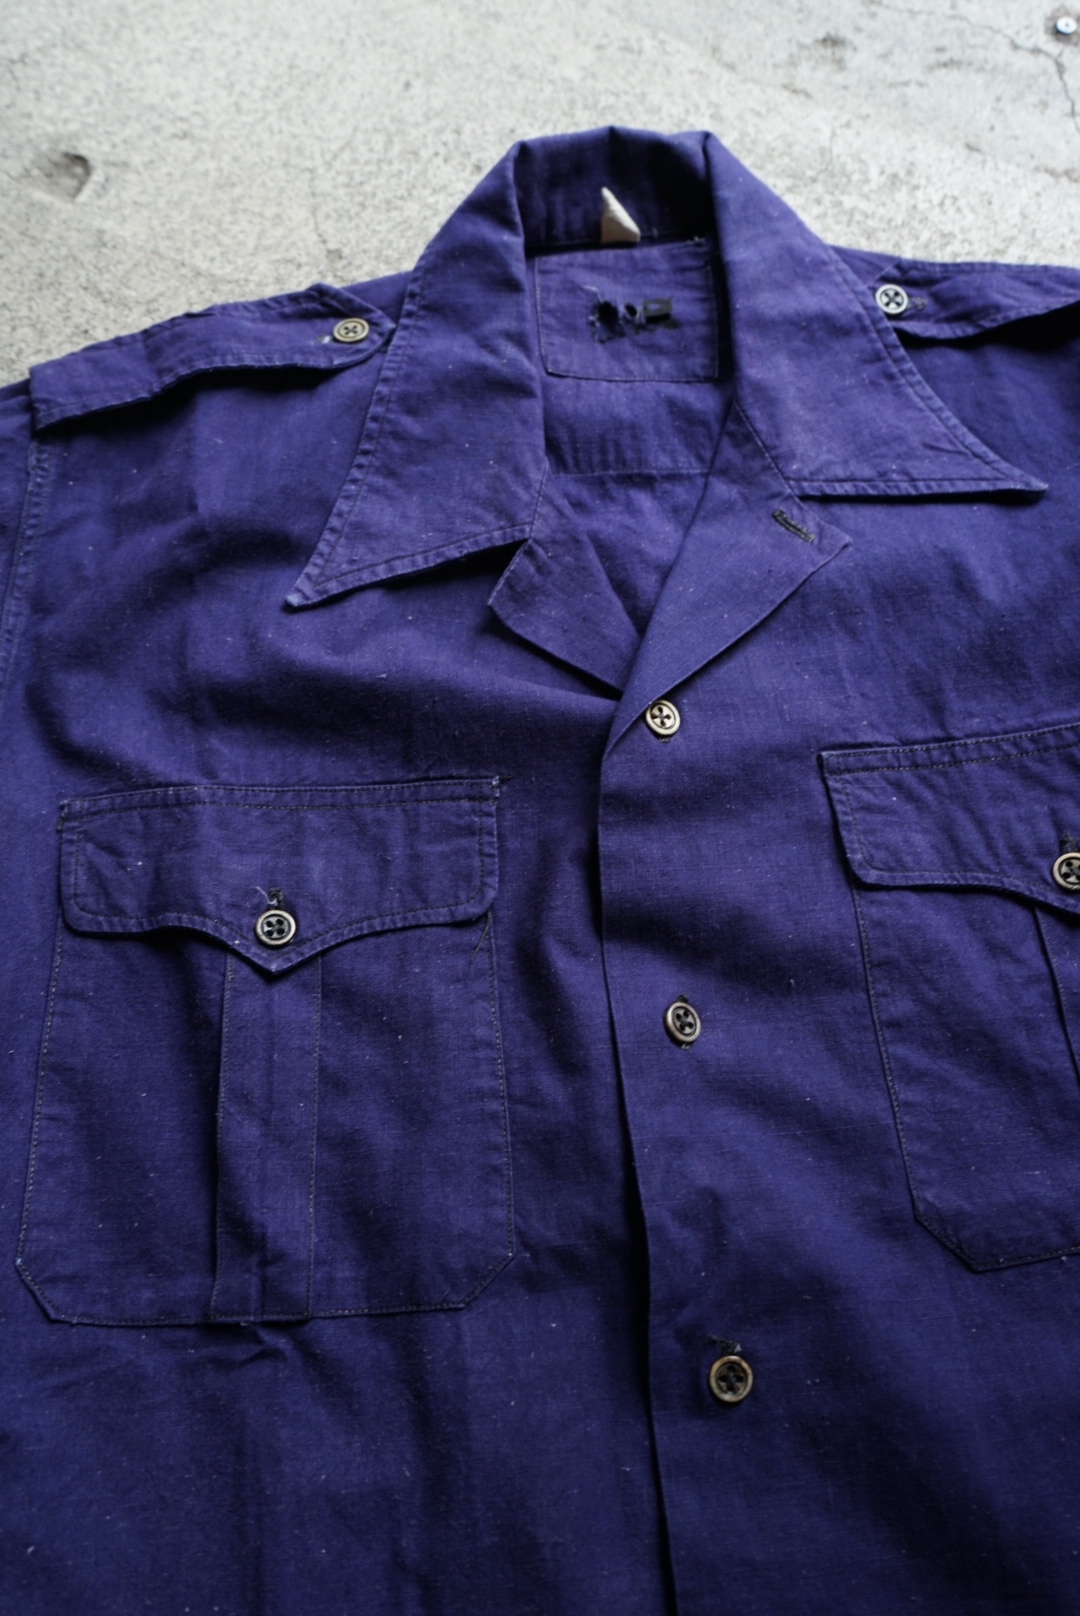 1940'S FRENCH ARMY PILOT BLUE SHIRT